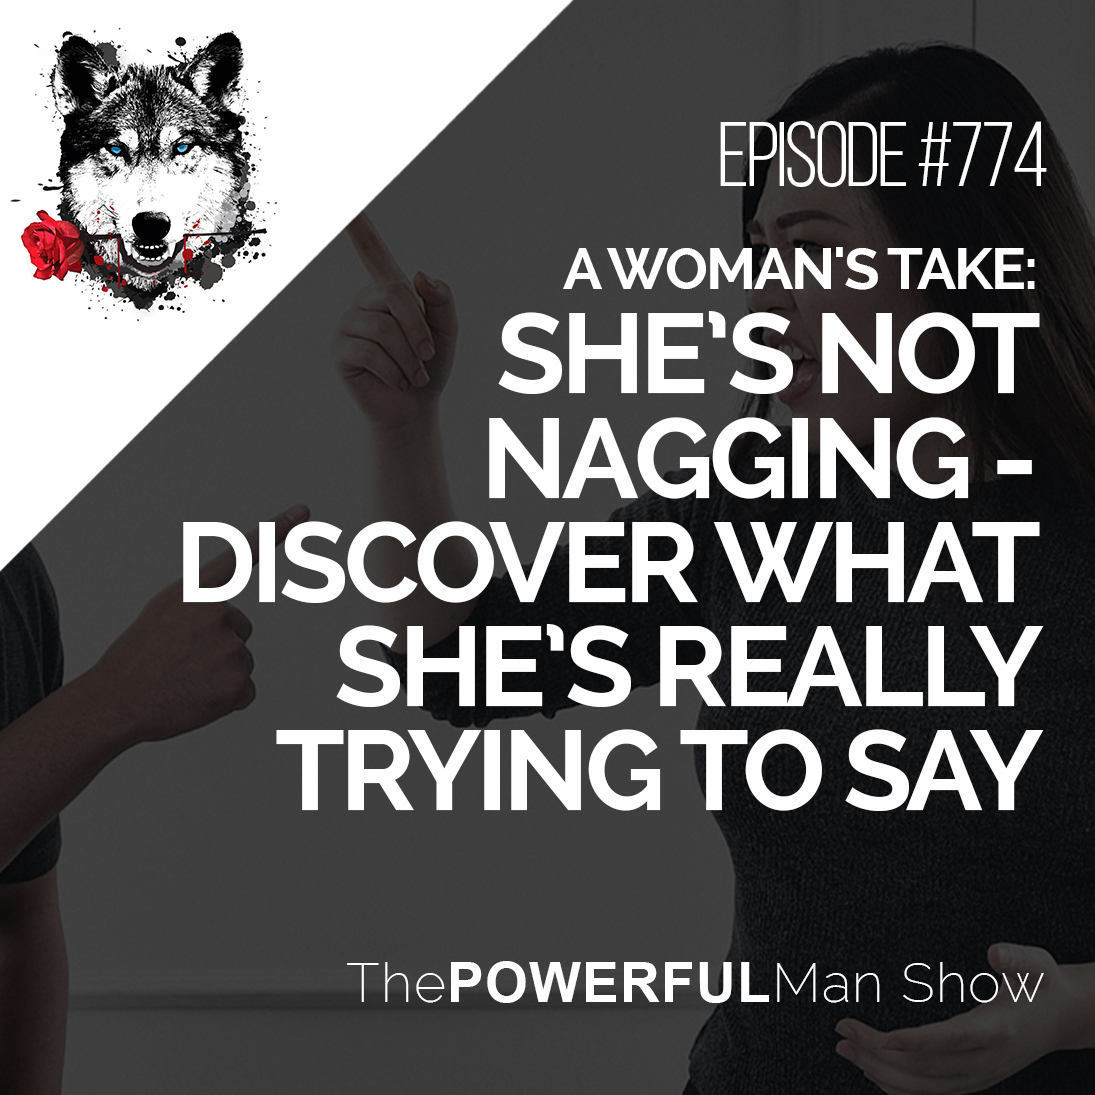 A Woman’s Take: She’s Not Nagging - Discover What She’s Really Trying To Say